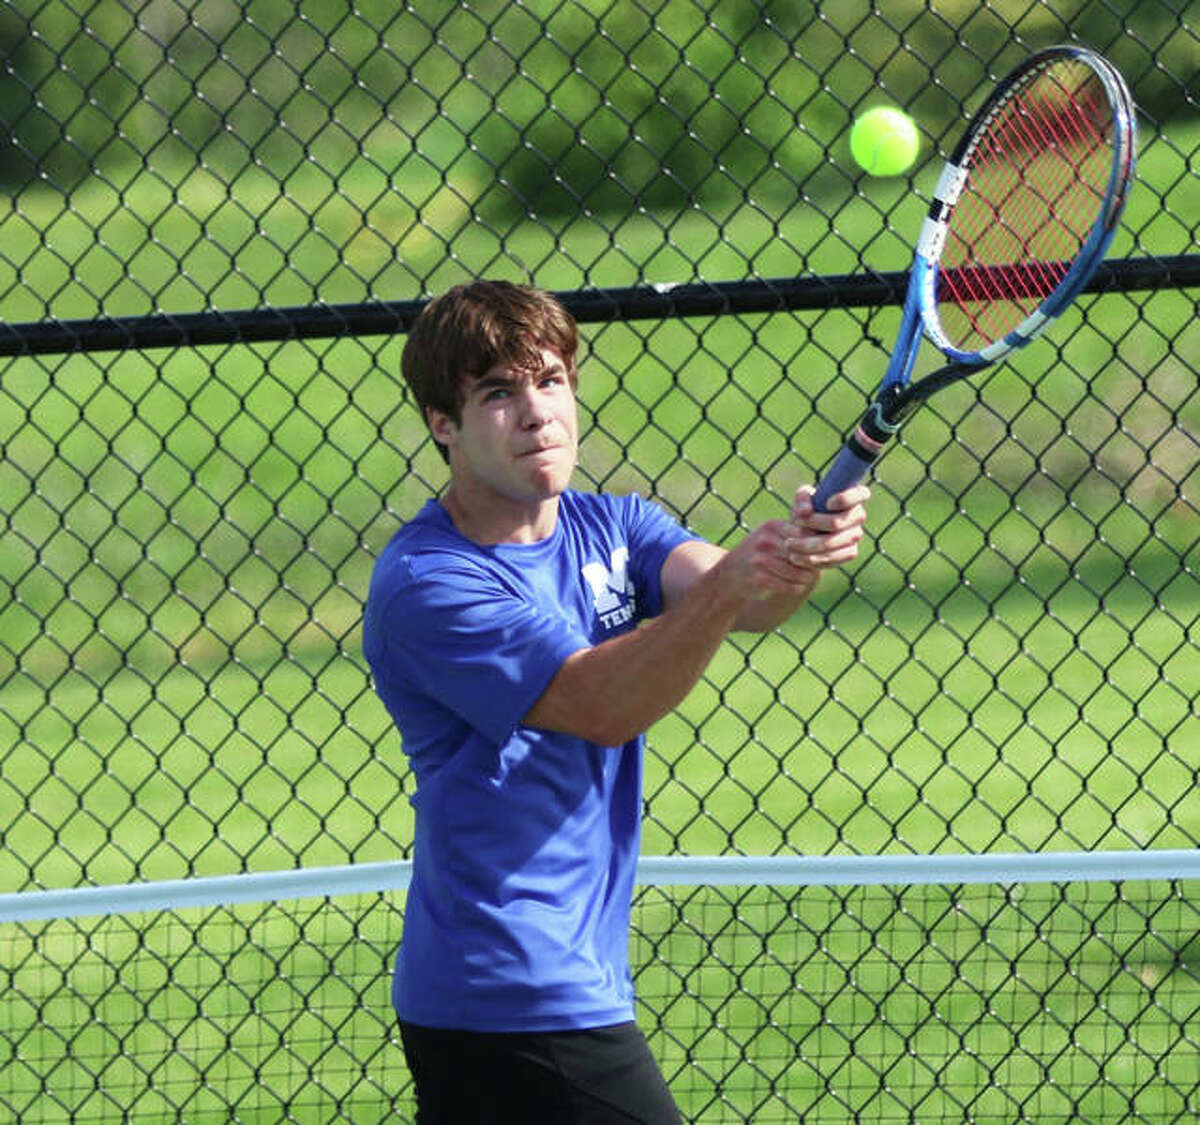 Marquette’s Marc Tassinari reaches up to hit a backhand in a No. 3 singles match against Alton on Thursday at Moore Park’s Simpson Tennis Center in Alton. Tassinari is the lone senior on the Explorers’ roster.